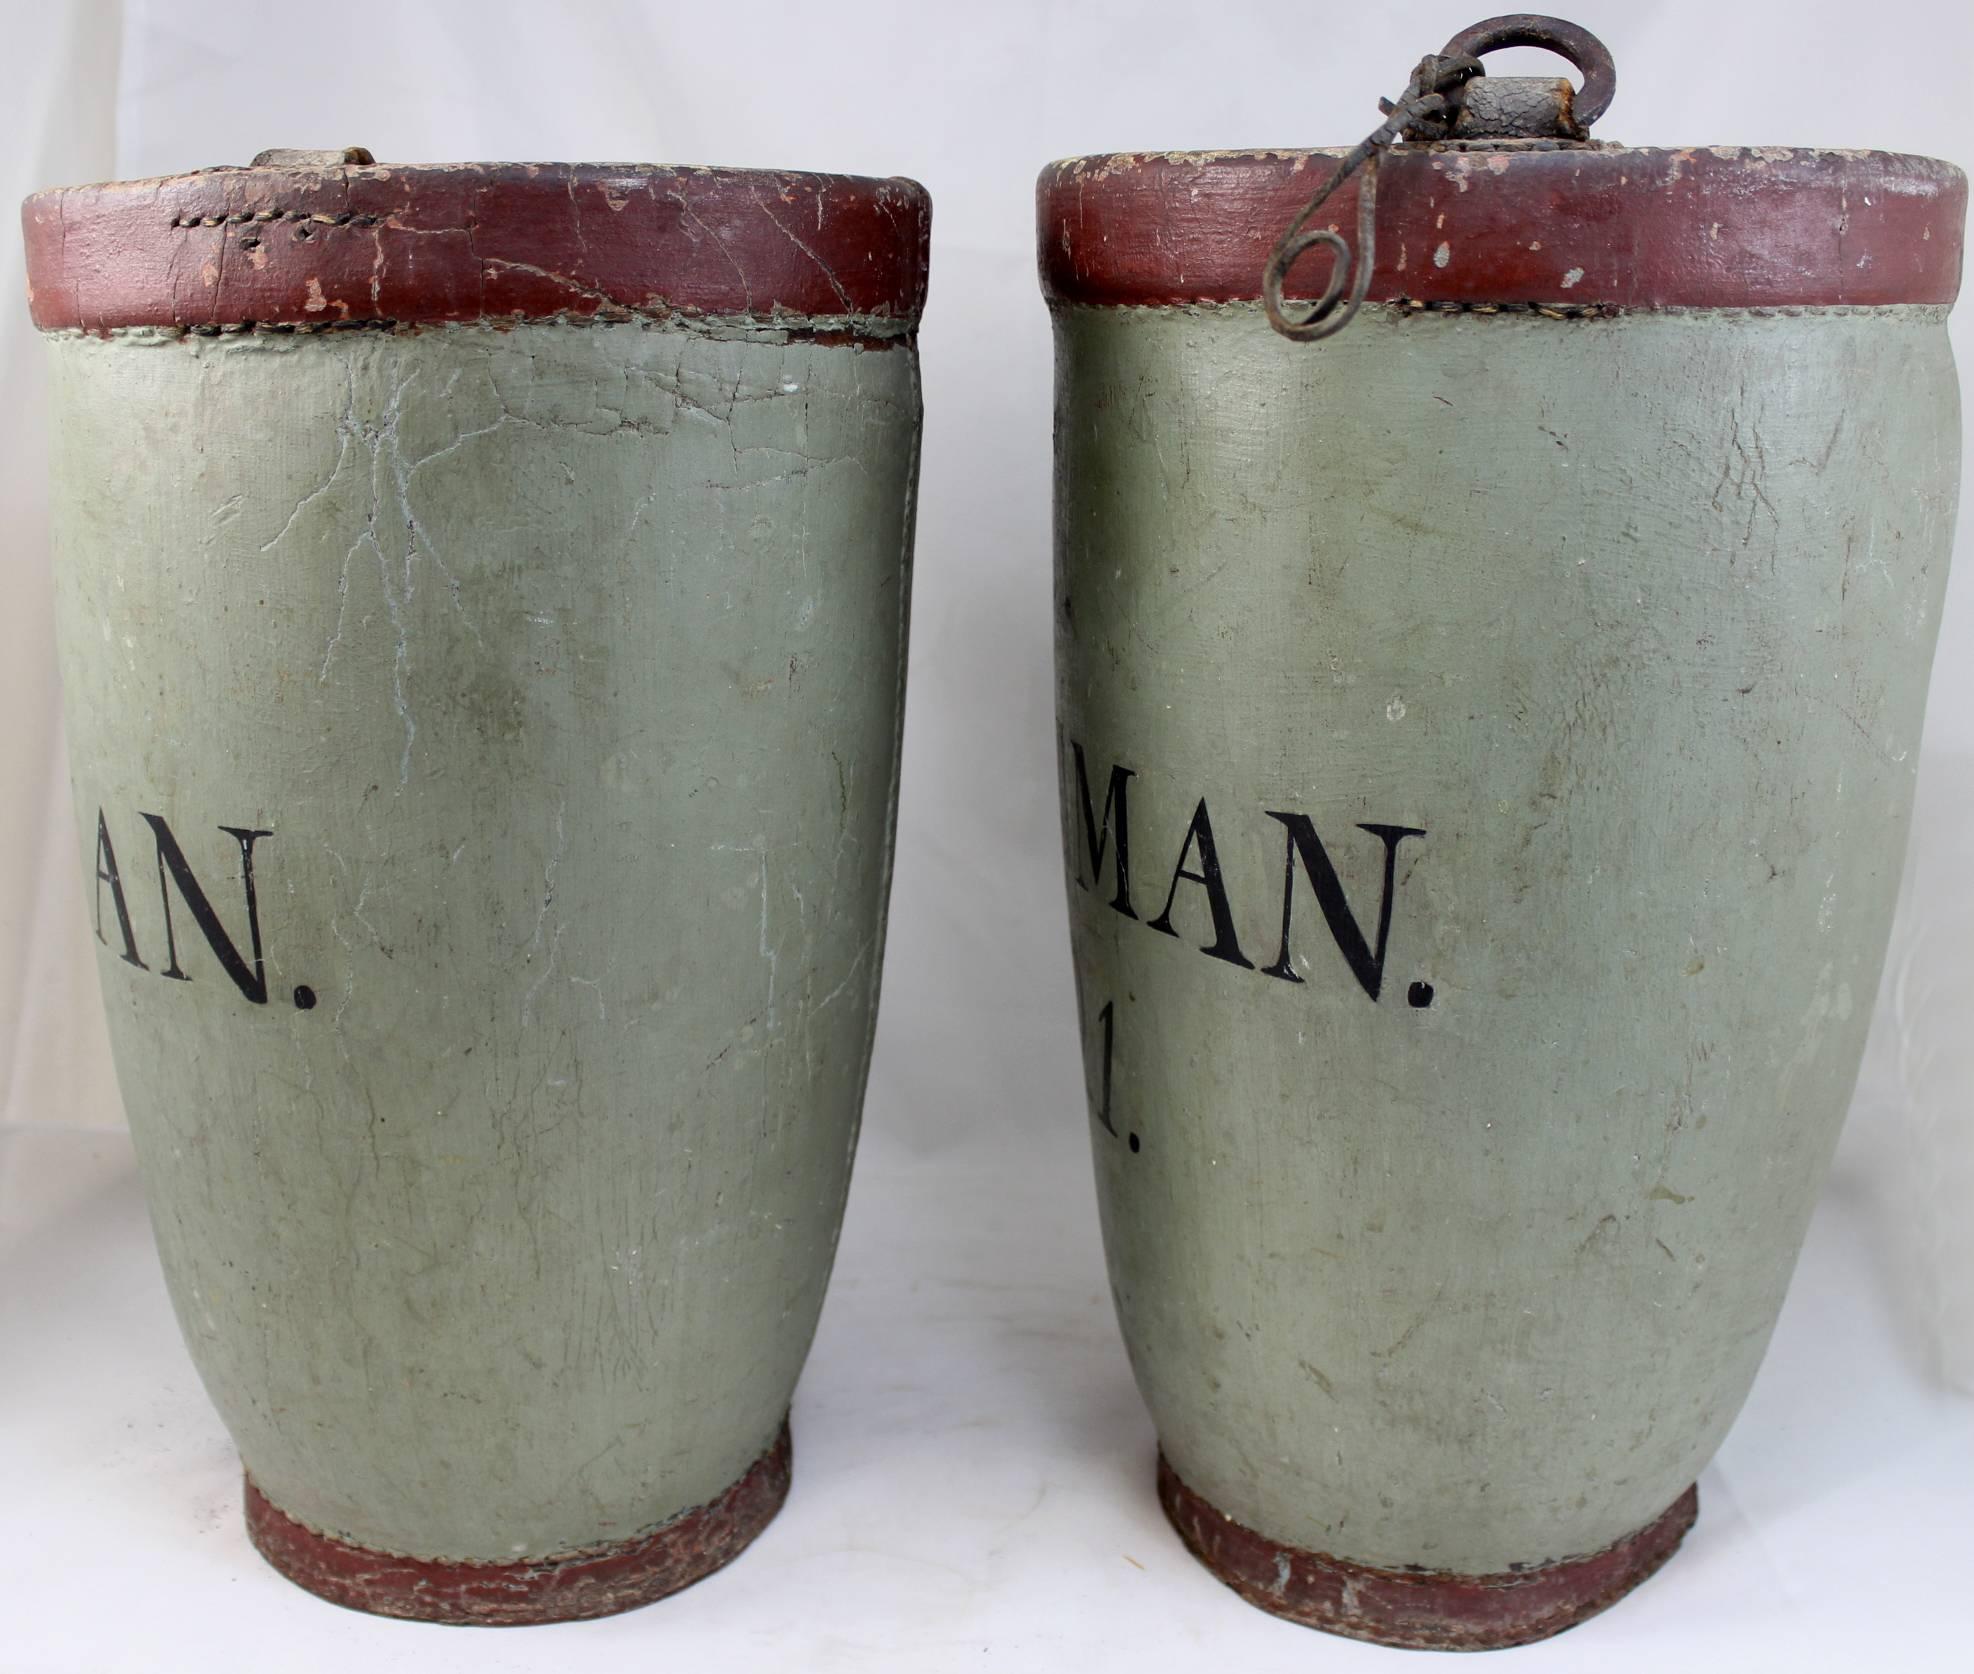 A rare matched pair of 19th century leather fire buckets marked “J-COLEMAN 1821 No. 1 and No. 2”. Each in an original green and gray paint with brick red trim and black leathering. We believe these fire buckets belonged to John Franklin Coleman